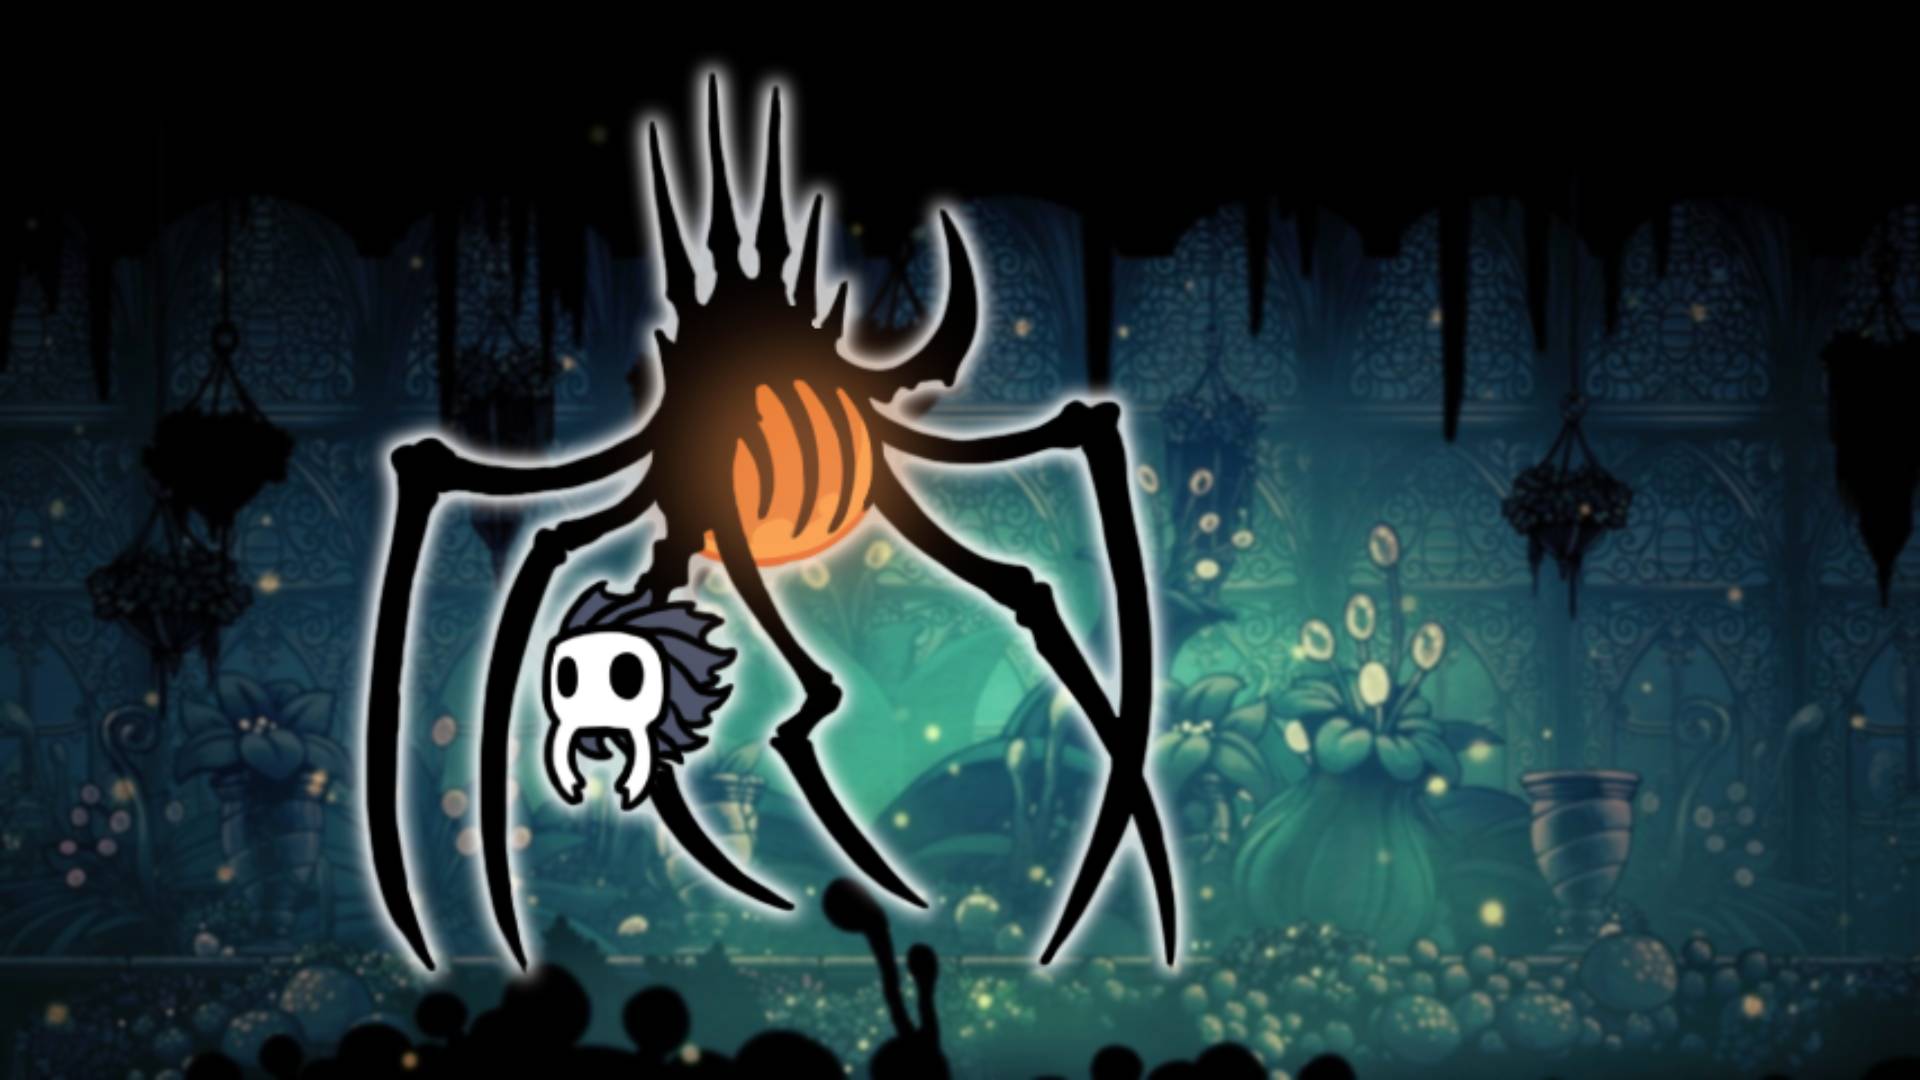 Nosk - the Hollow Knight boss, is visible against a mossy green background area from Hollow Knight 